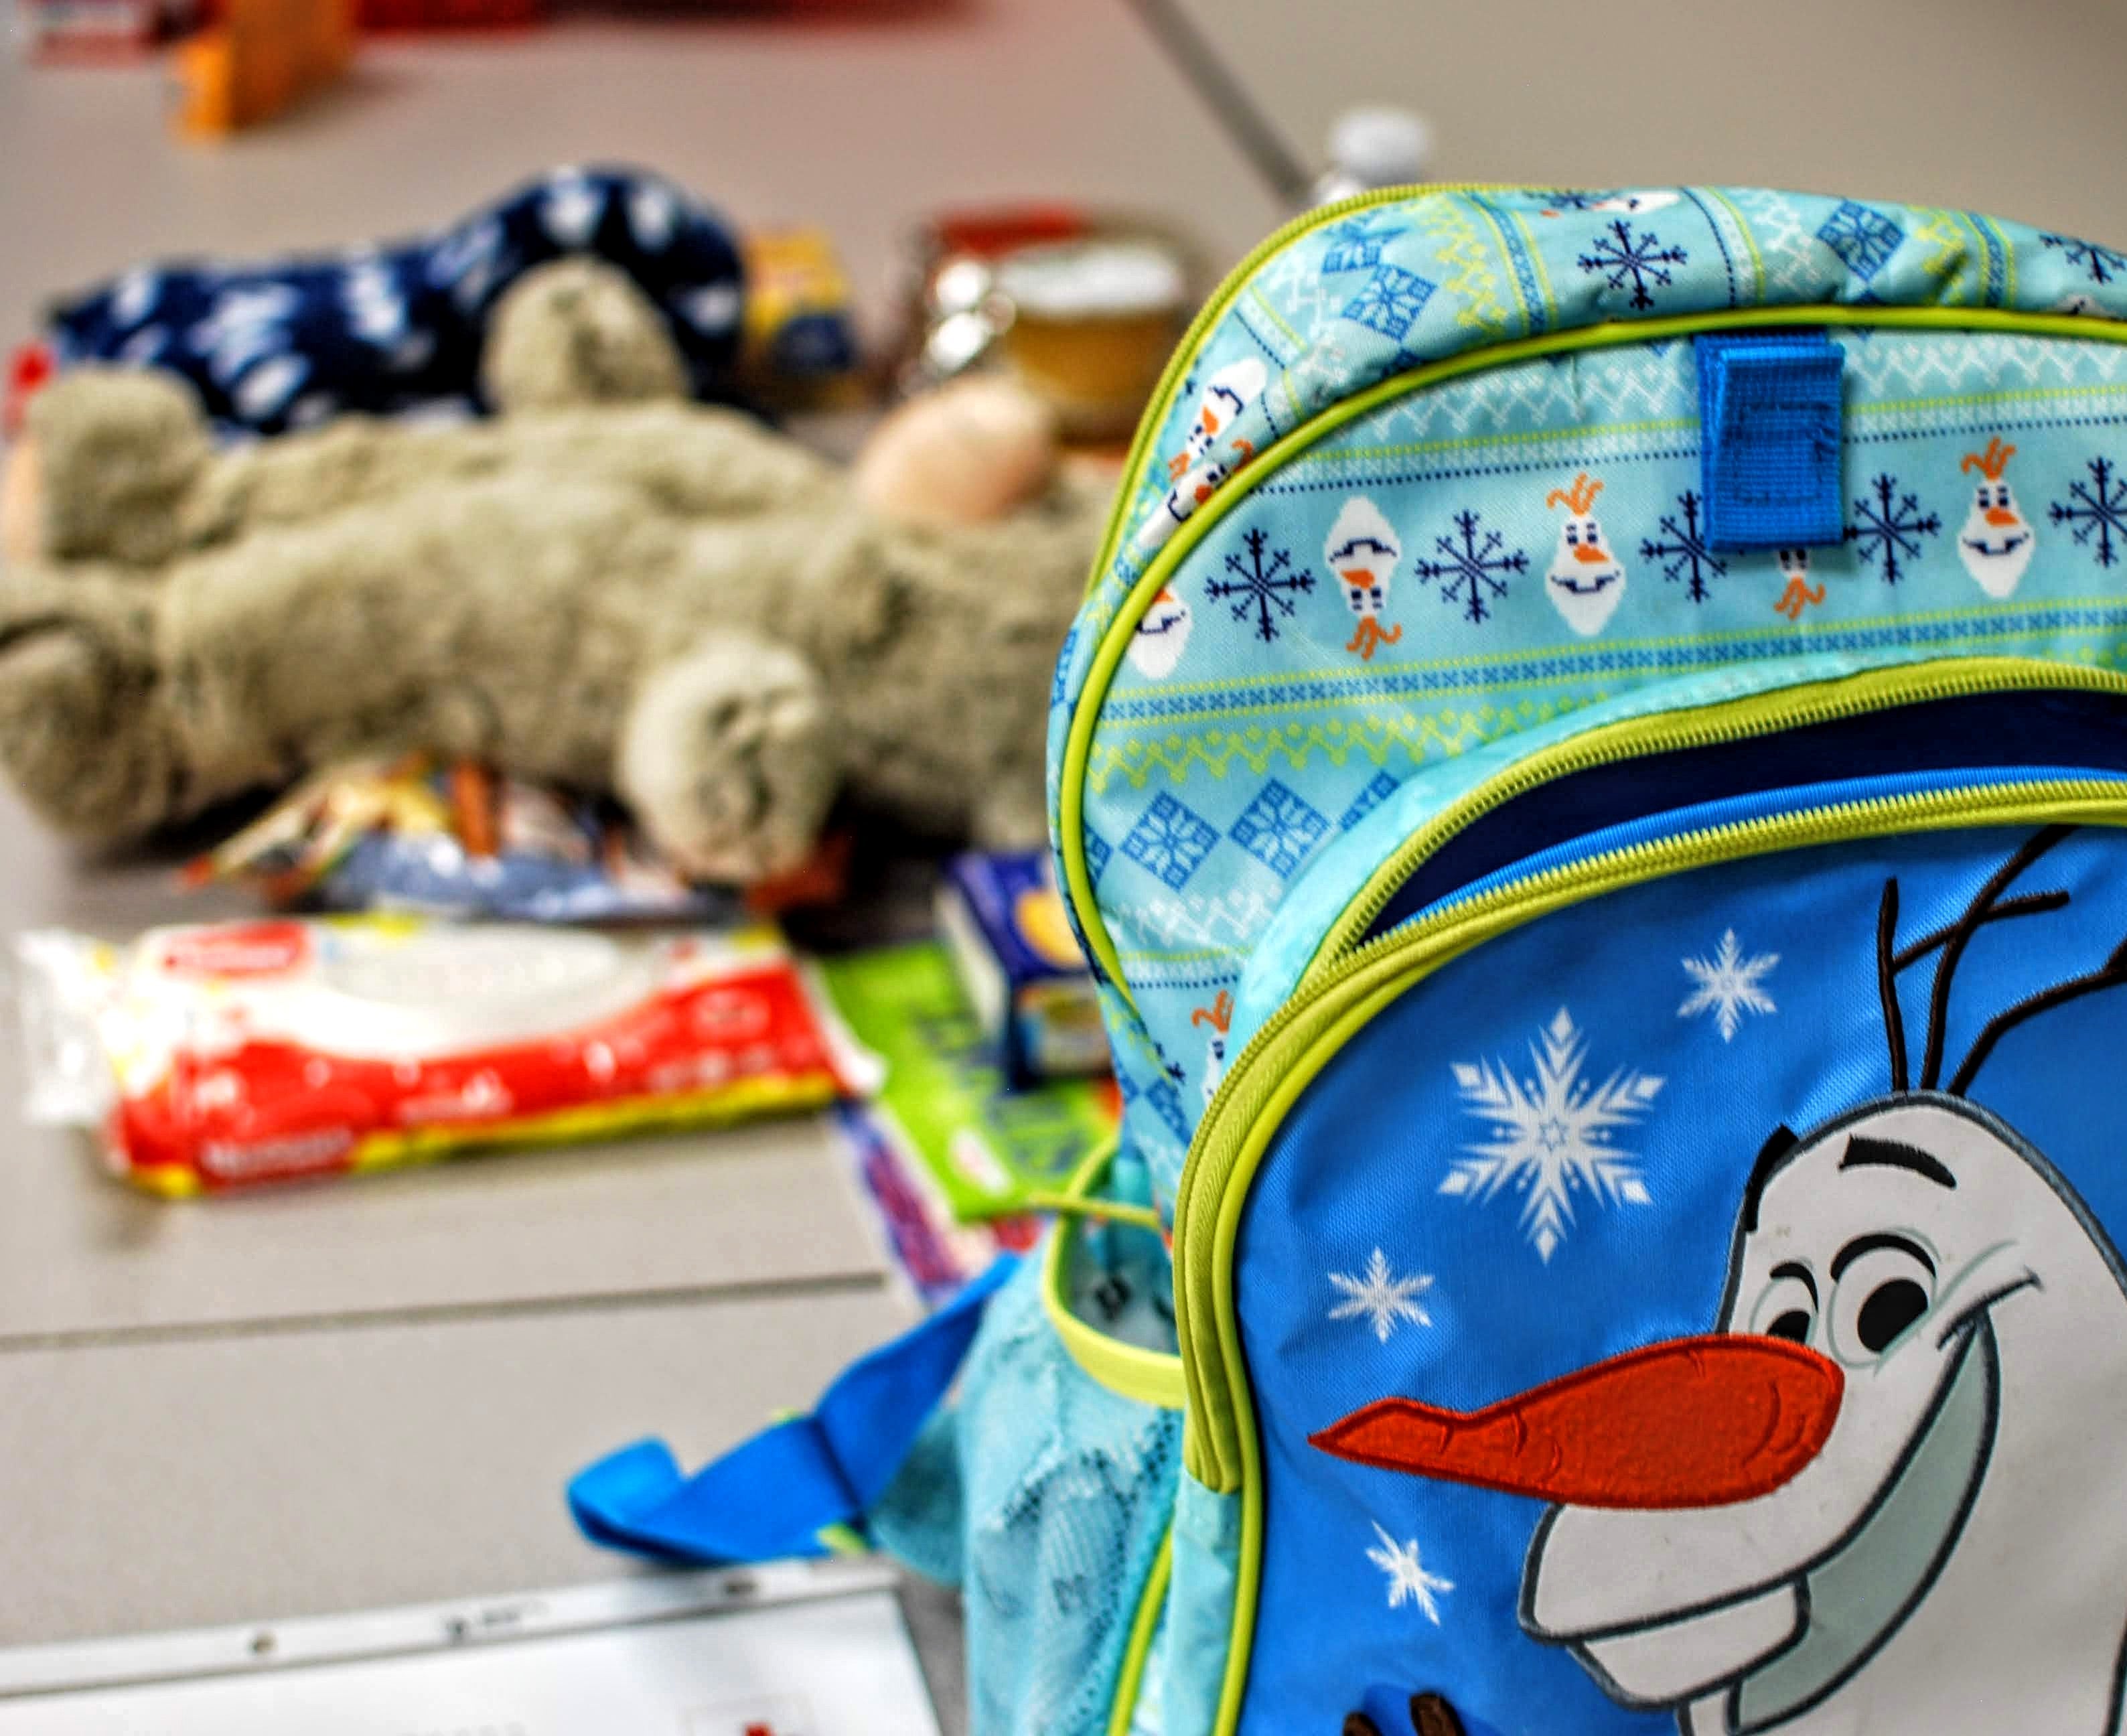 A children's backpack and teddy bear.